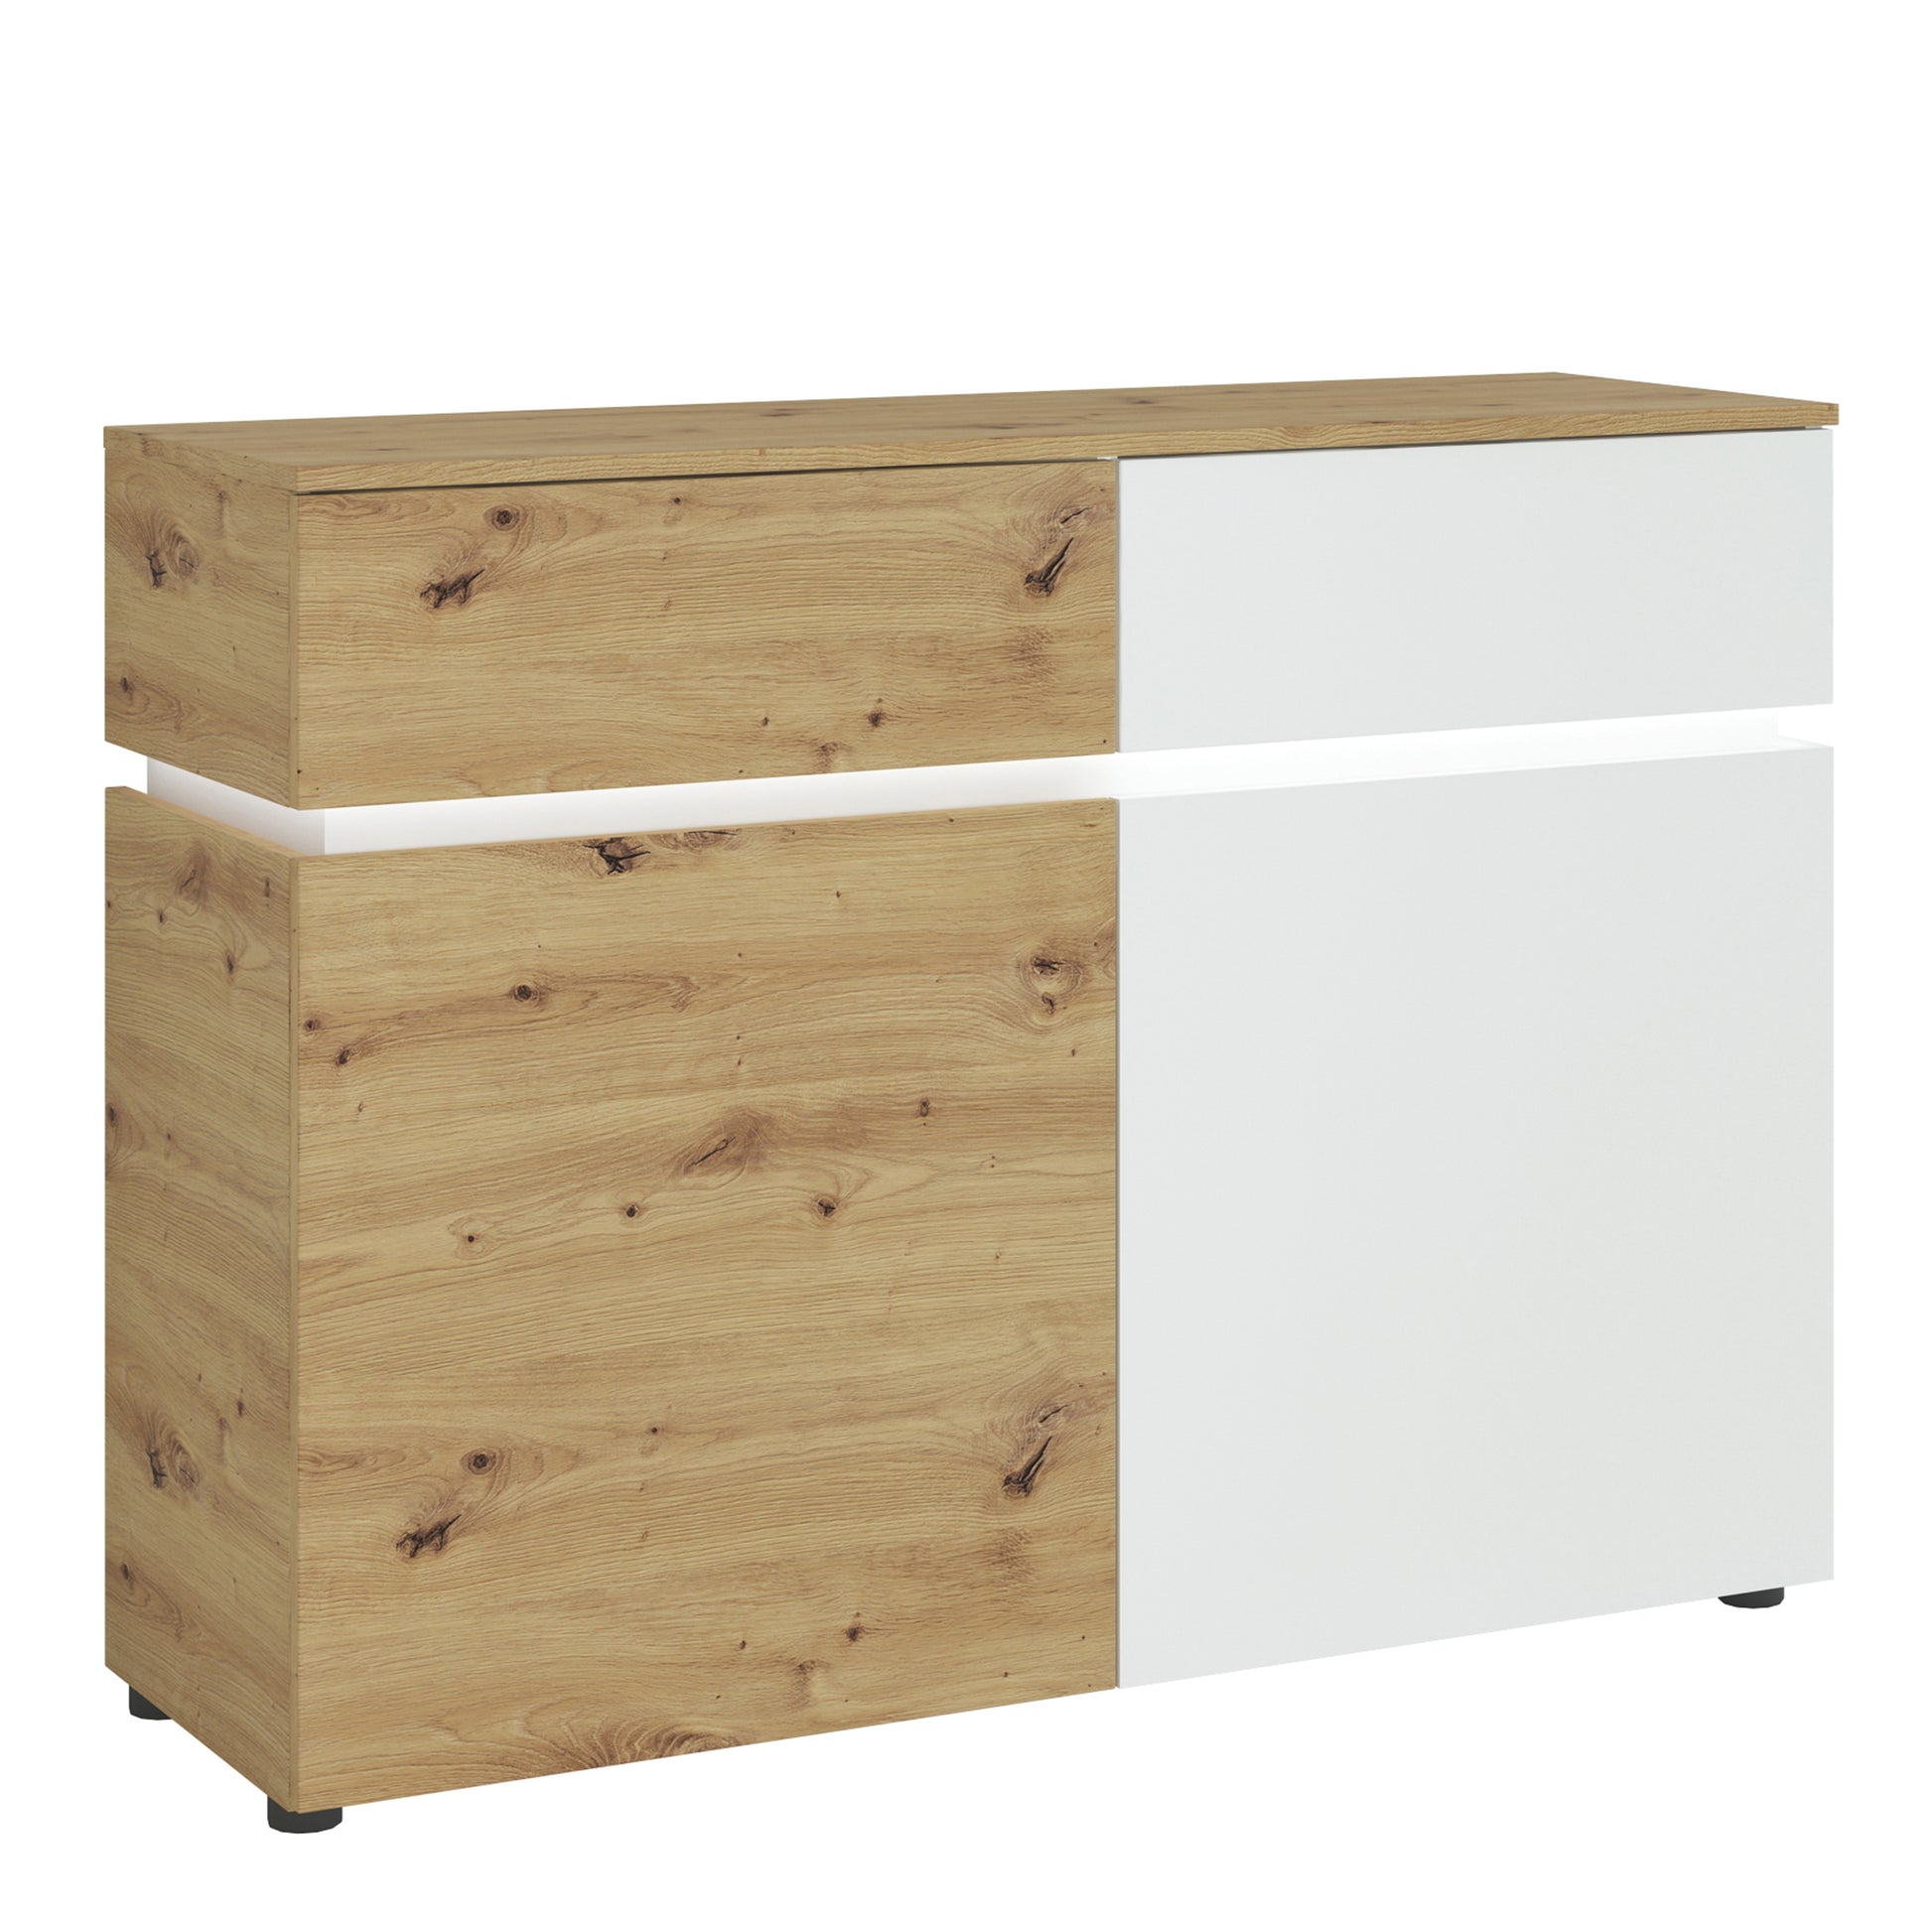 Luci Bright Luci 2 door 2 drawer cabinet (including LED lighting) in White and Oak